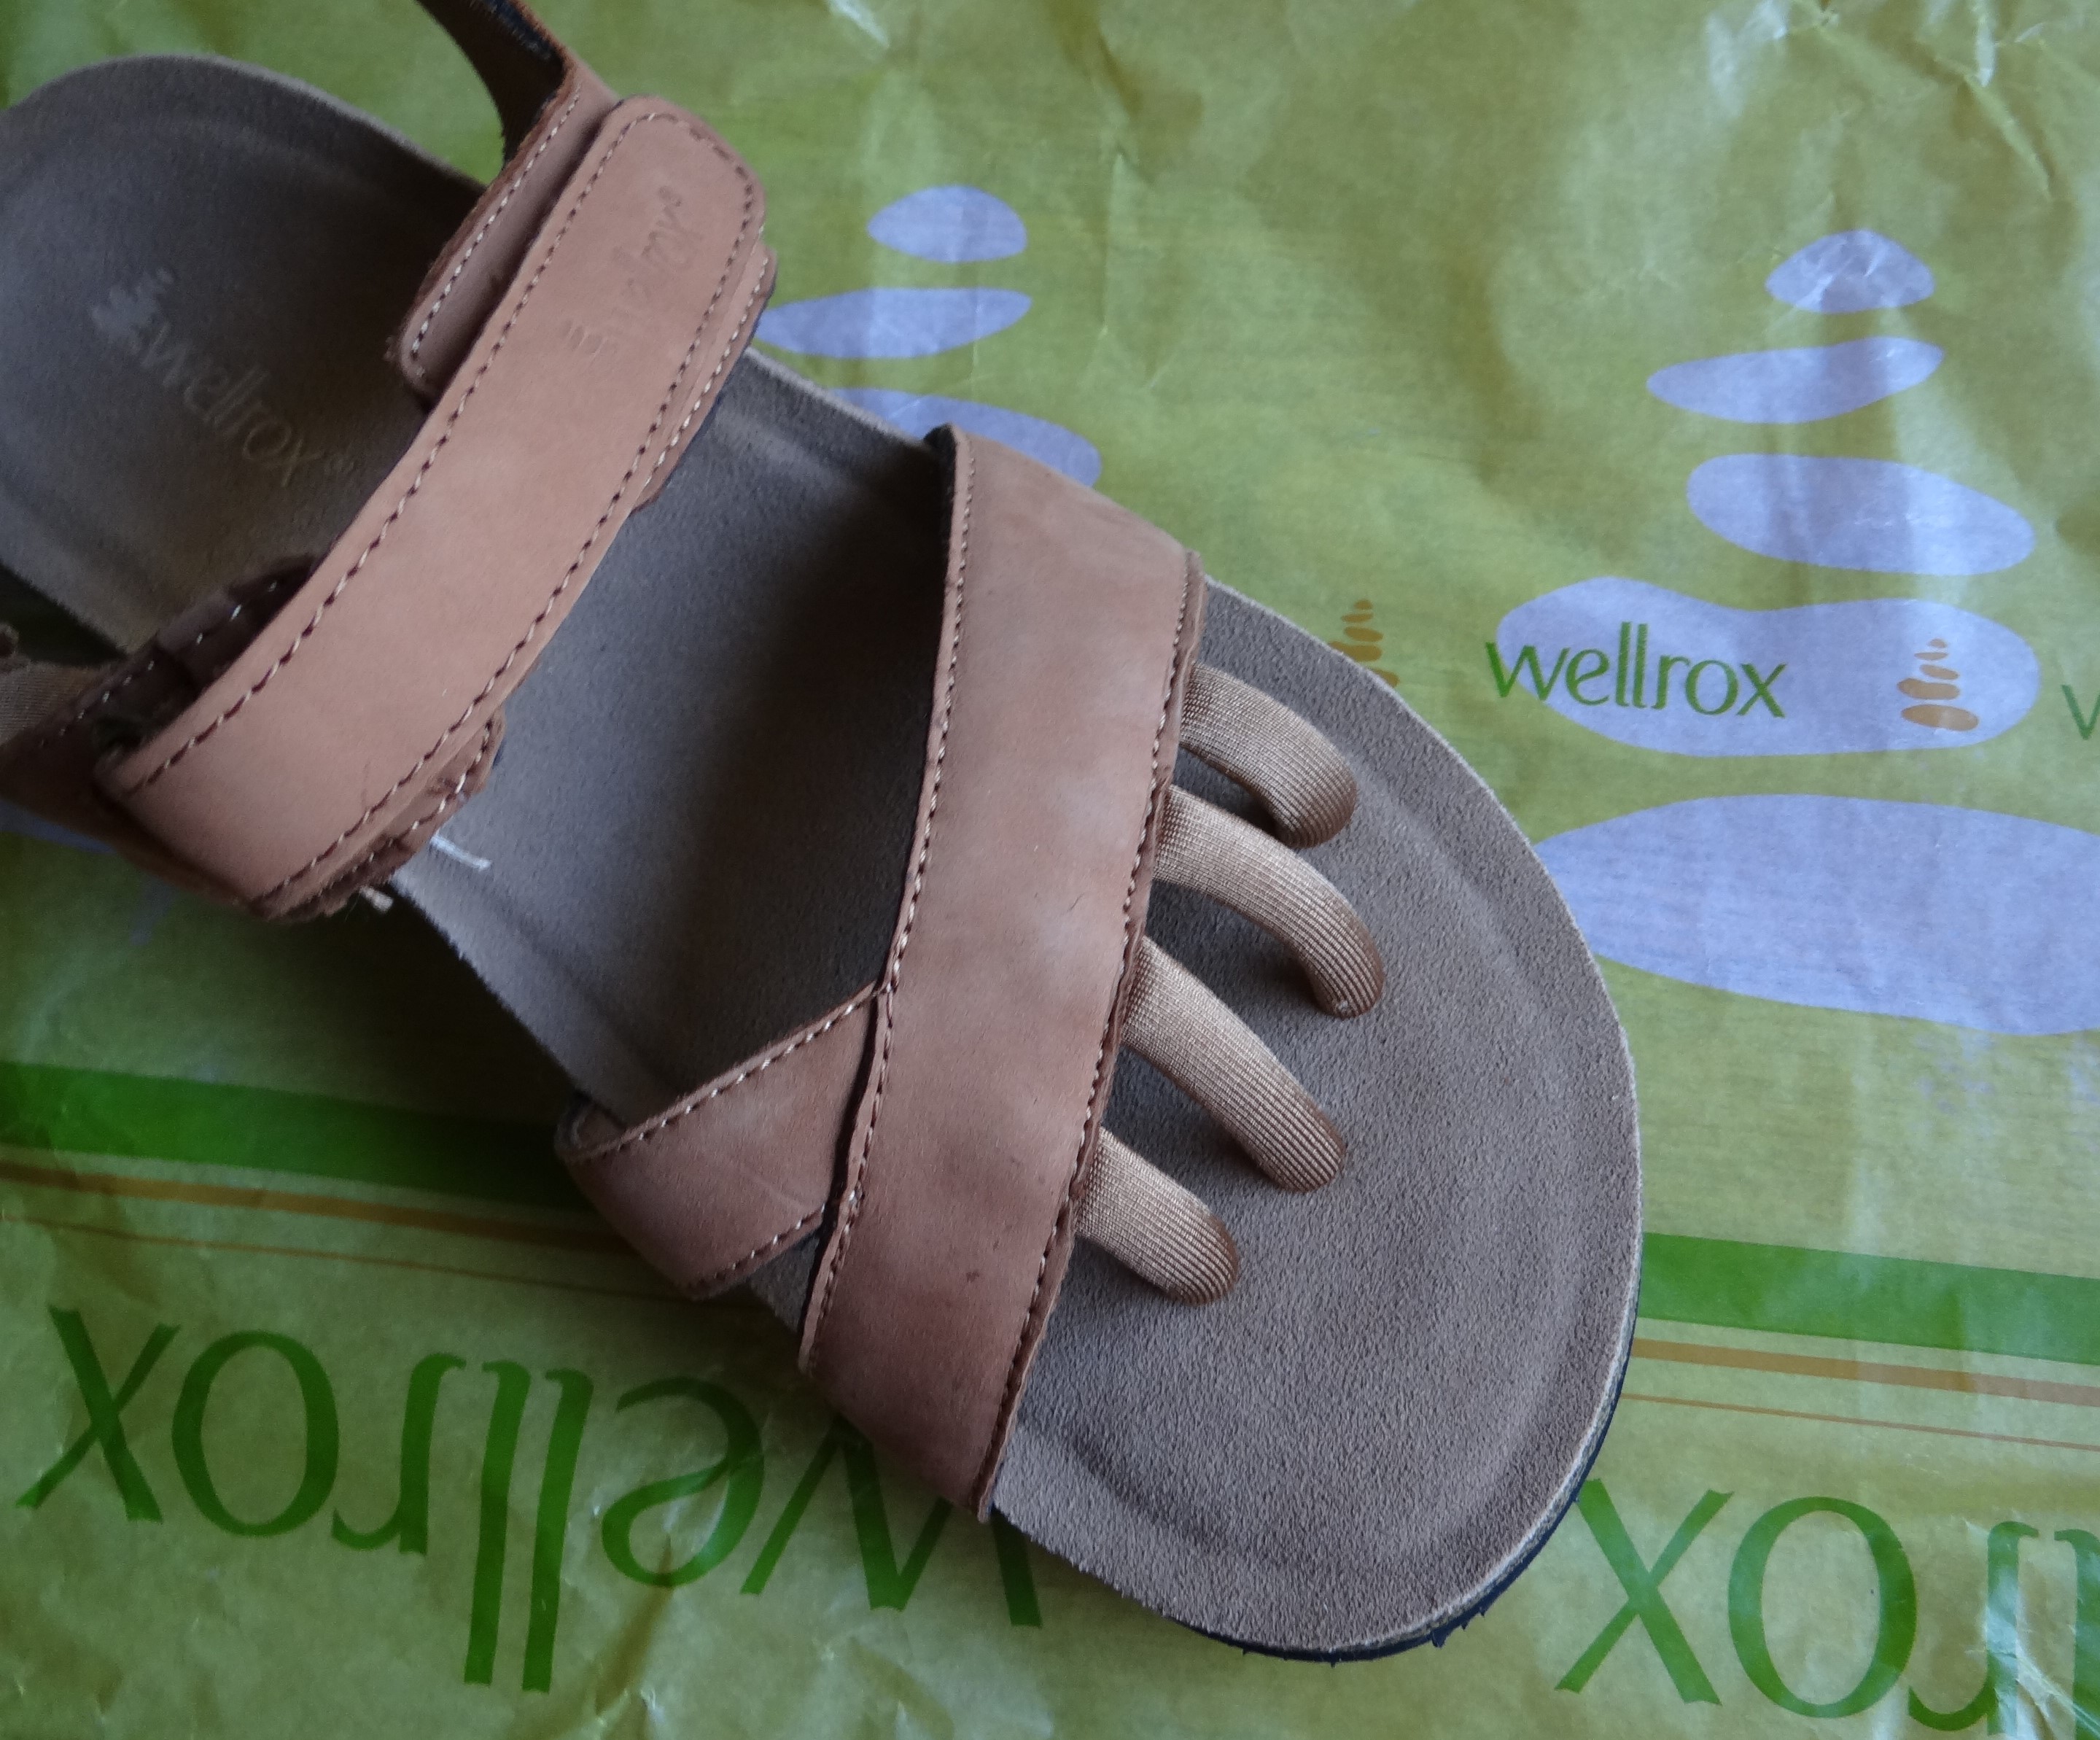 wellrox shoes